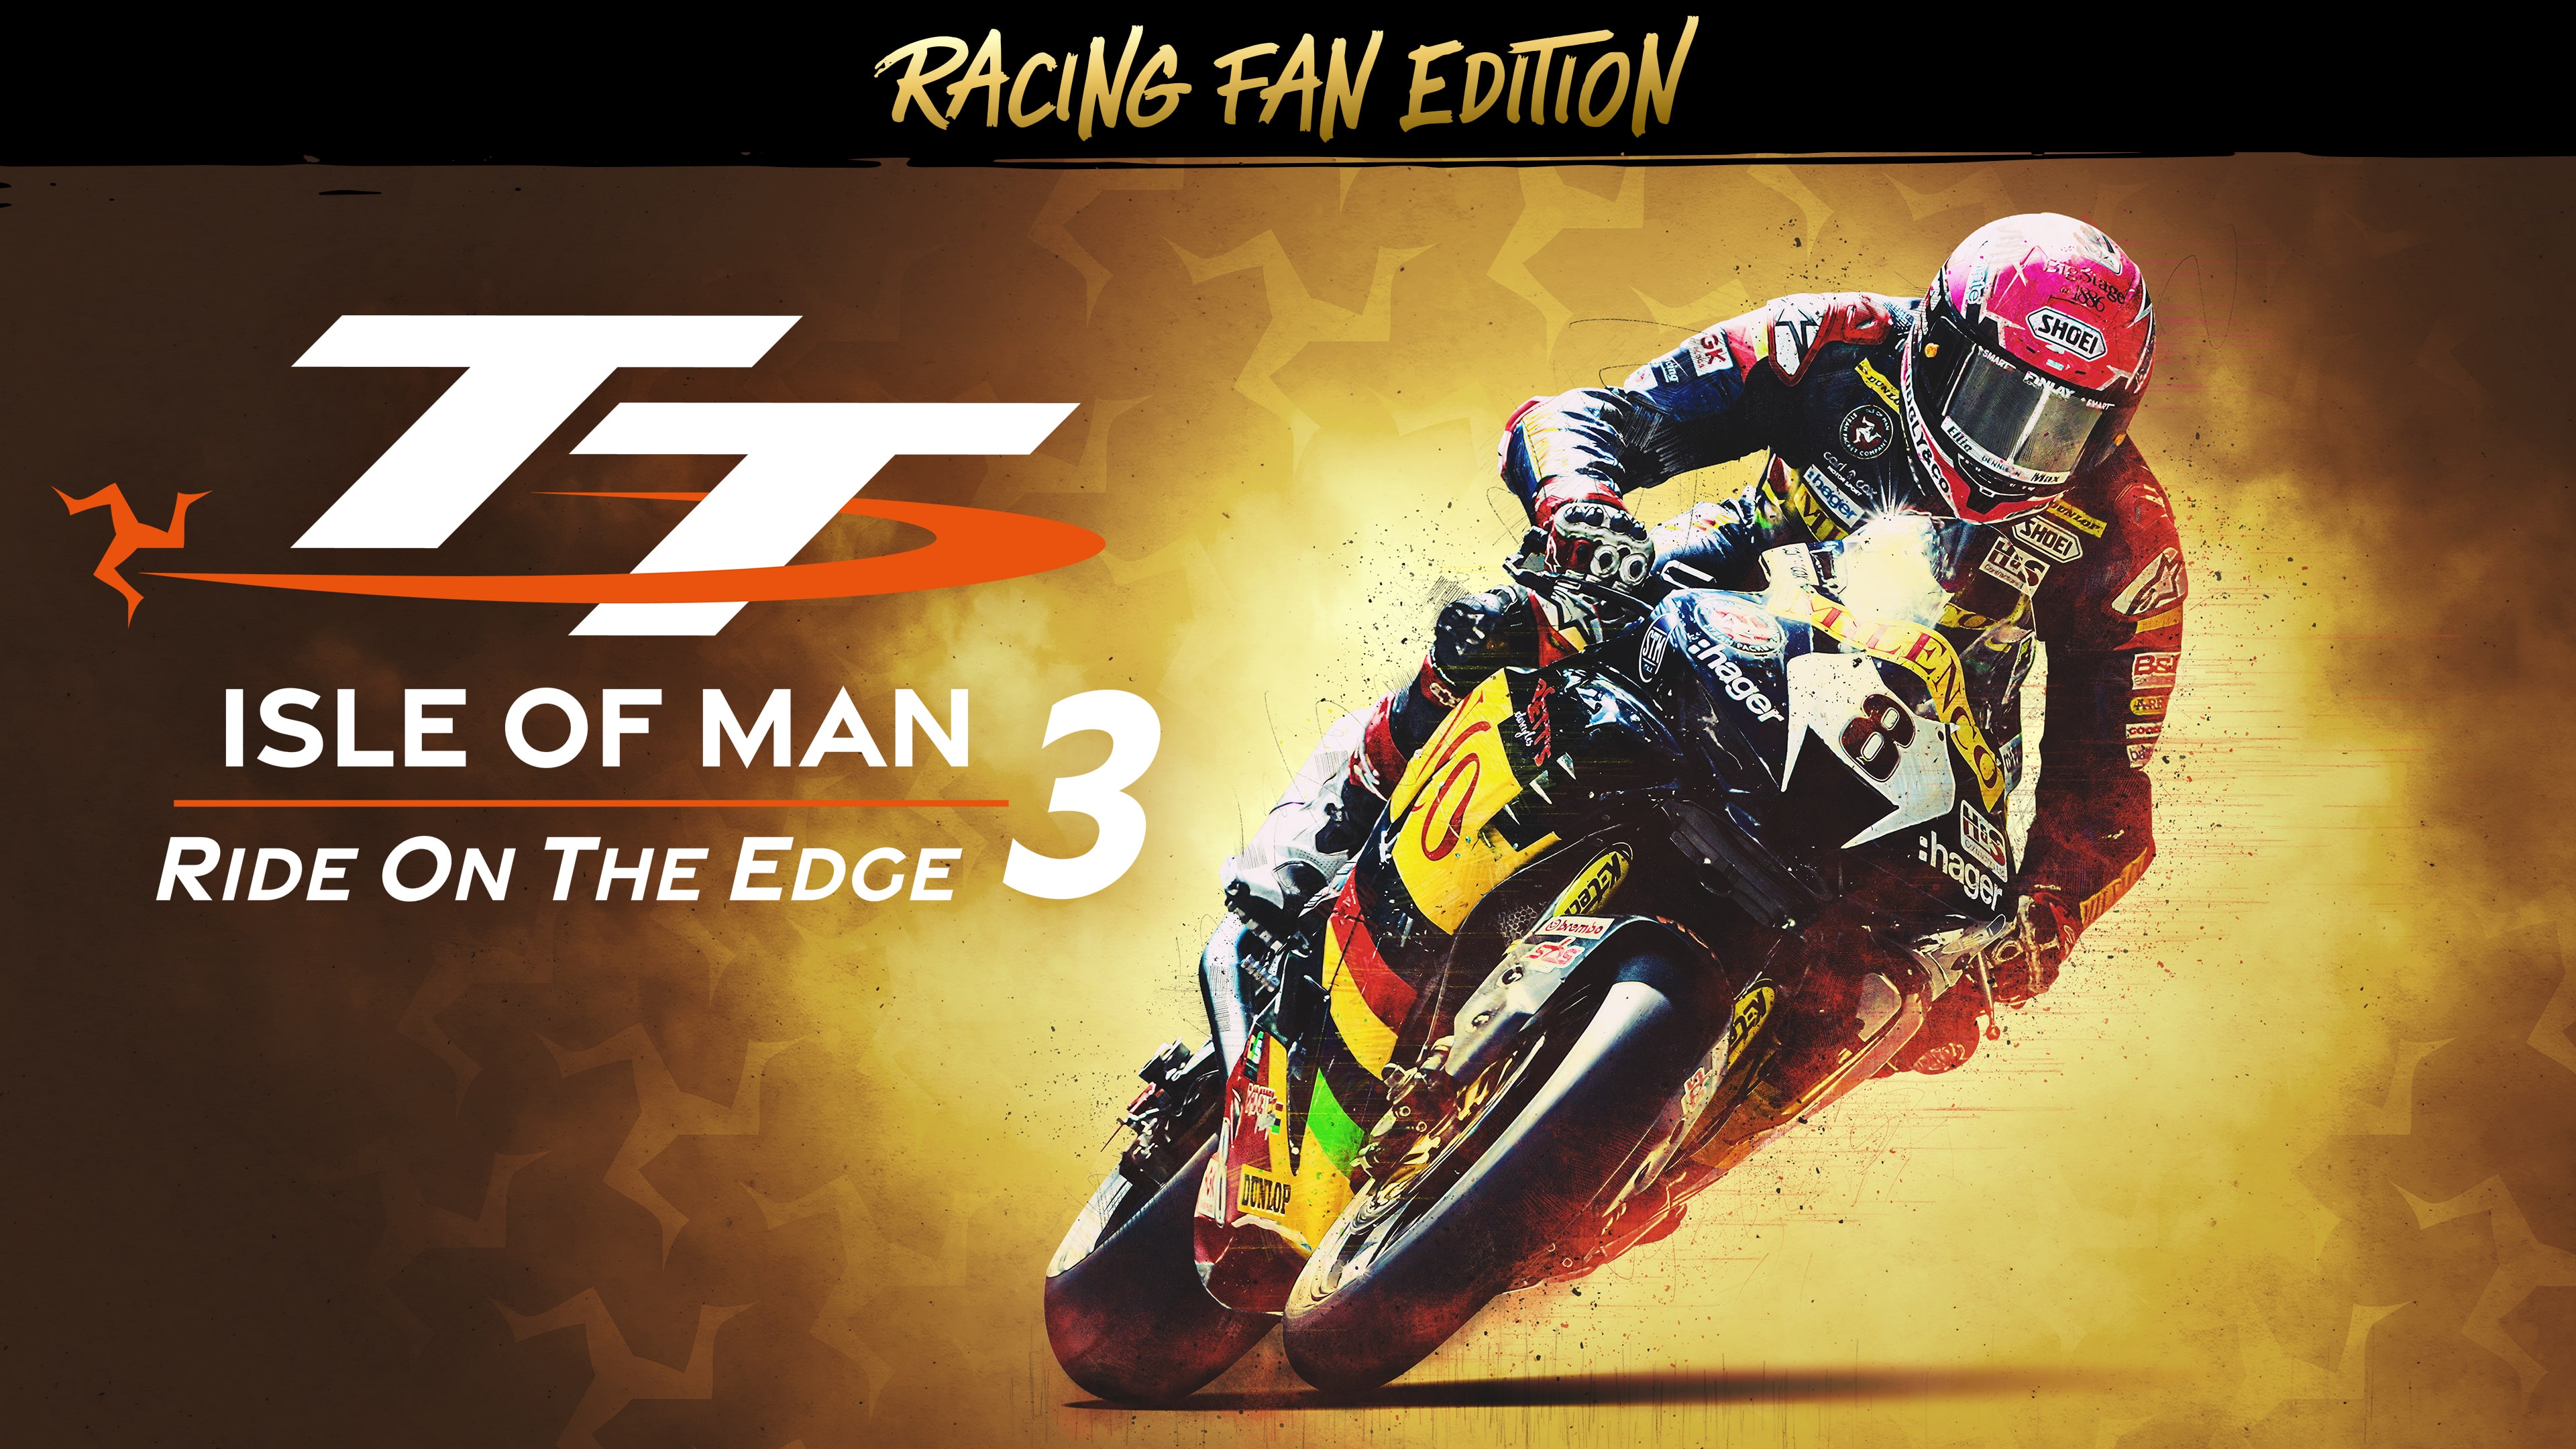 TT Isle Of Man 3 - Racing Fan Edition (Simplified Chinese, English, Korean, Japanese, Traditional Chinese)